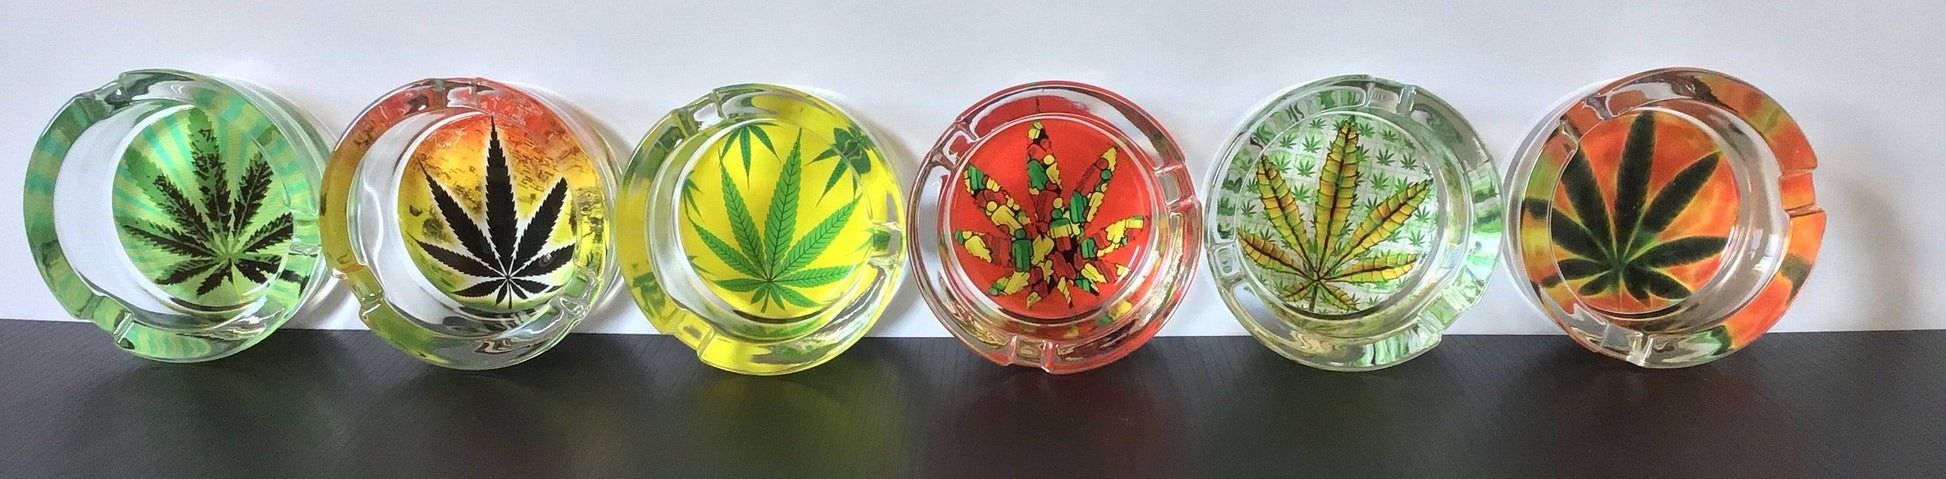 Highest Quality Canna Leaf Design Durable Glass Ashtray yoga smokes yoga studio, delivery, delivery near me, yoga smokes smoke shop, find smoke shop, head shop near me, yoga studio, headshop, head shop, local smoke shop, psl, psl smoke shop, smoke shop, smokeshop, yoga, yoga studio, dispensary, local dispensary, smokeshop near me, port saint lucie, florida, port st lucie, lounge, life, highlife, love, stoned, highsociety. Yoga Smokes